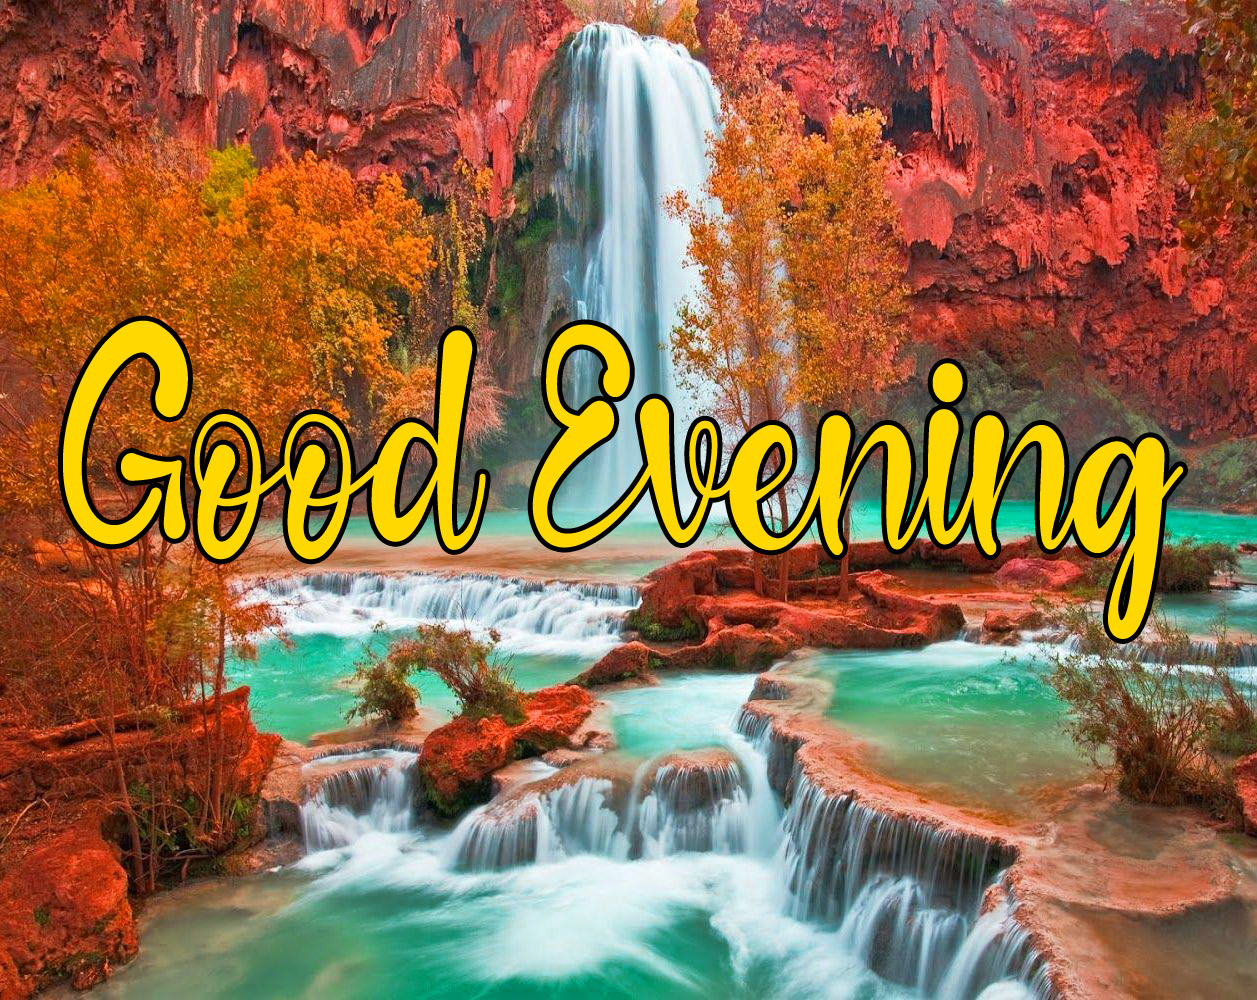 Free good evening images Wallpaper Download 